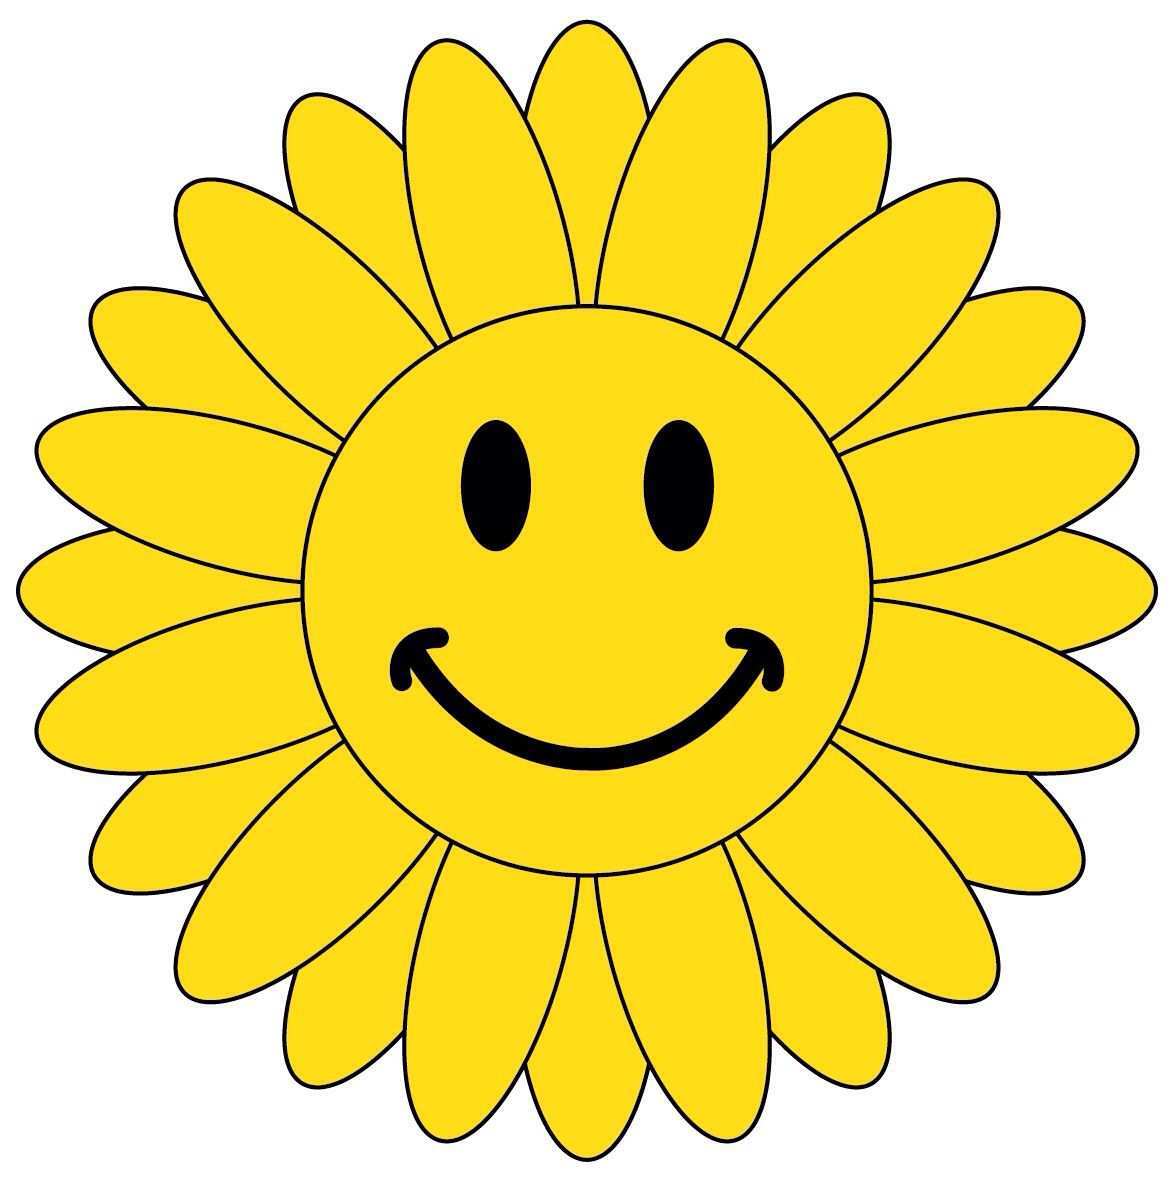 Smiley Flower Happy Smiley Face Animated Smiley Faces Smiley Happy